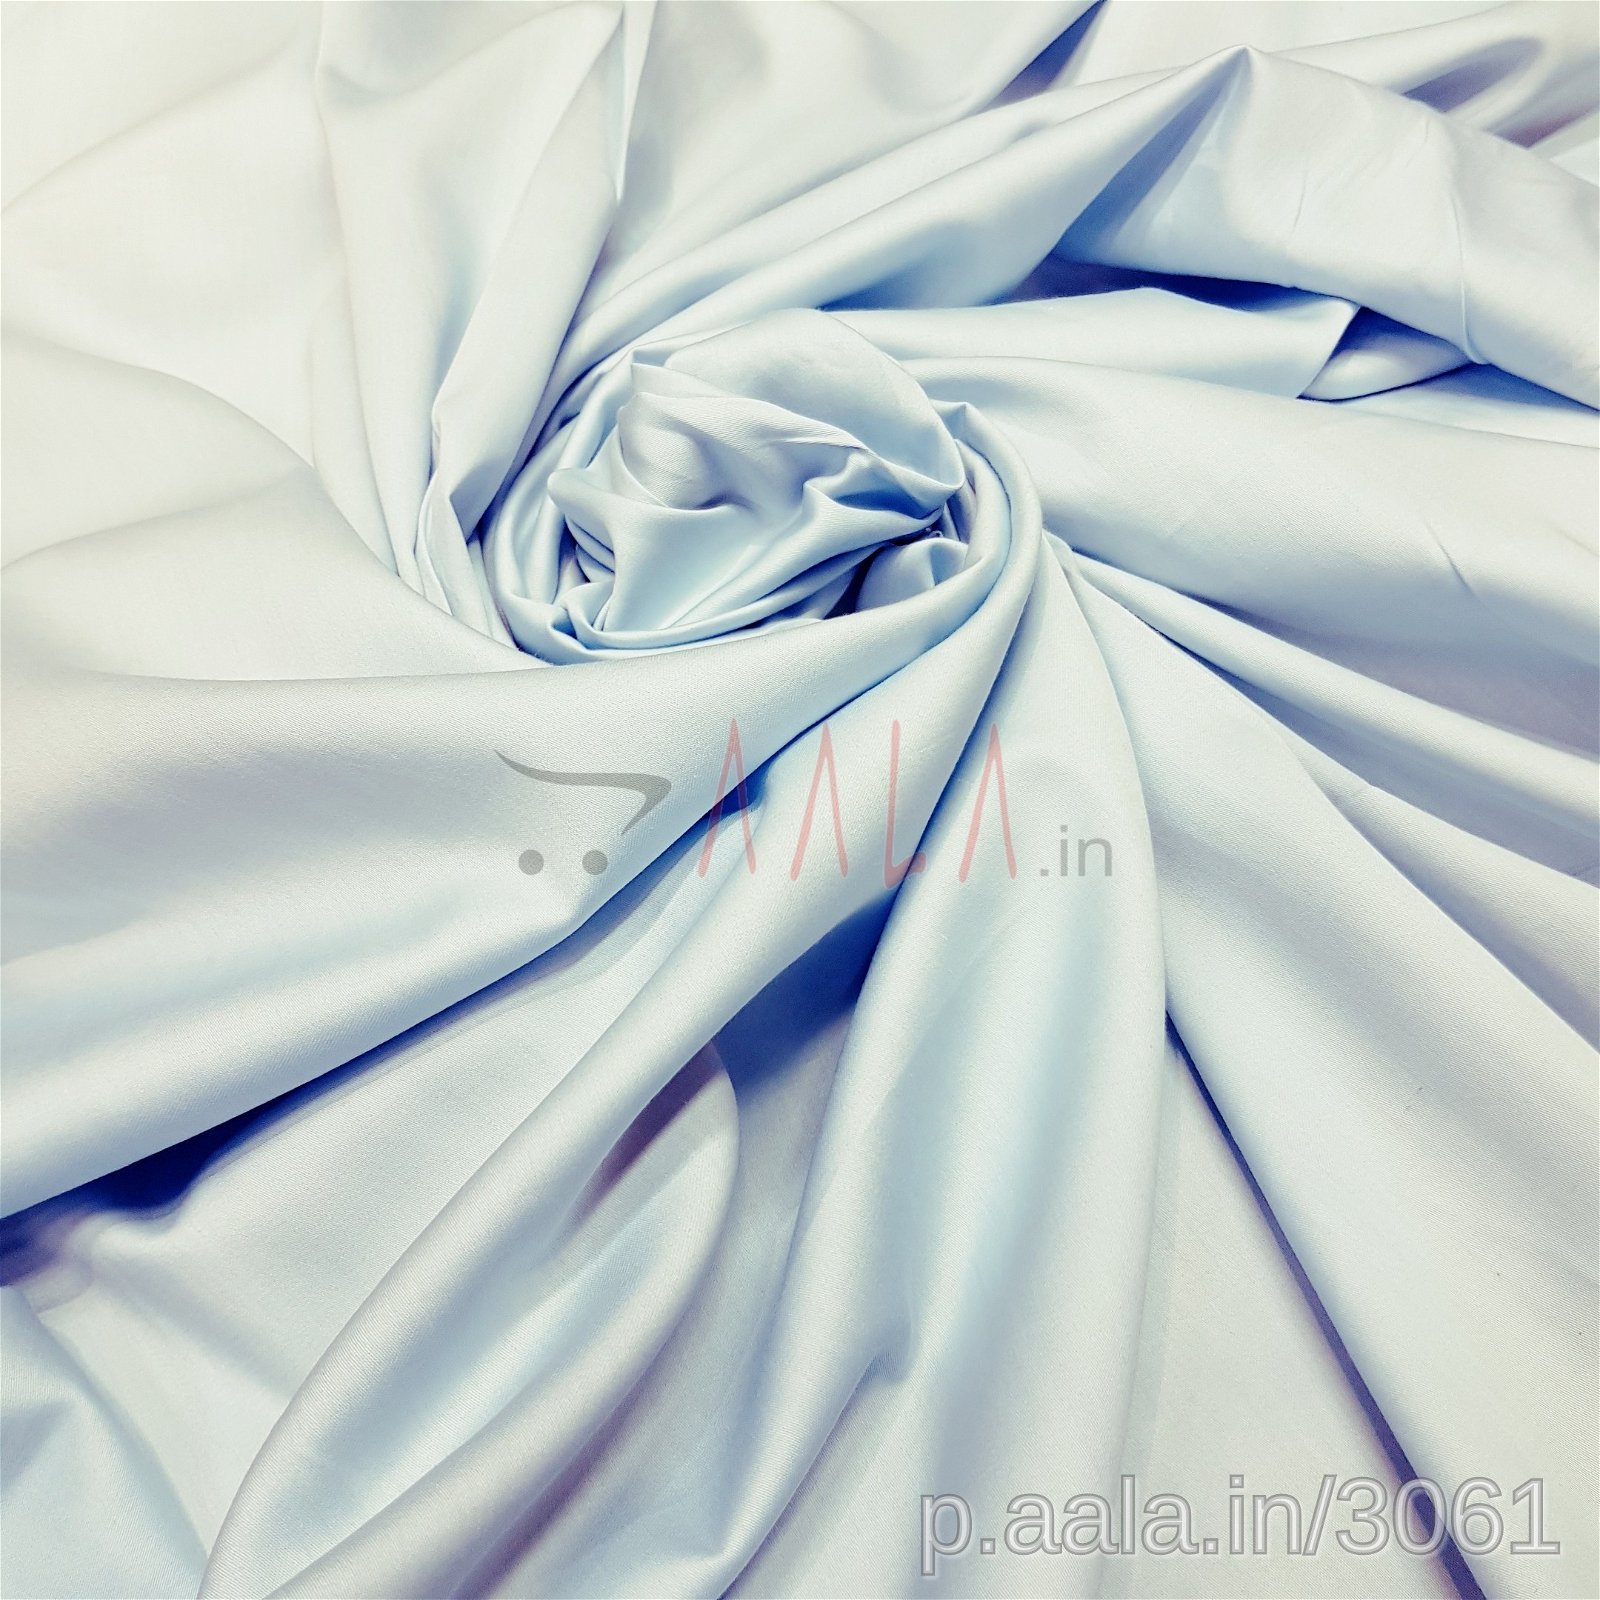 Satin Cotton 44 Inches Dyed Per Metre #3061